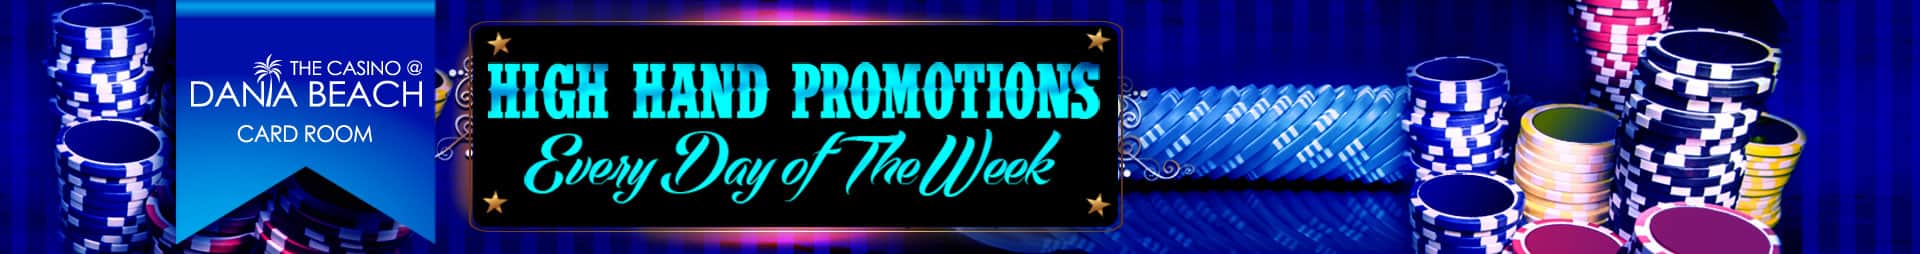 Banner. High hand promotions every day of the week.